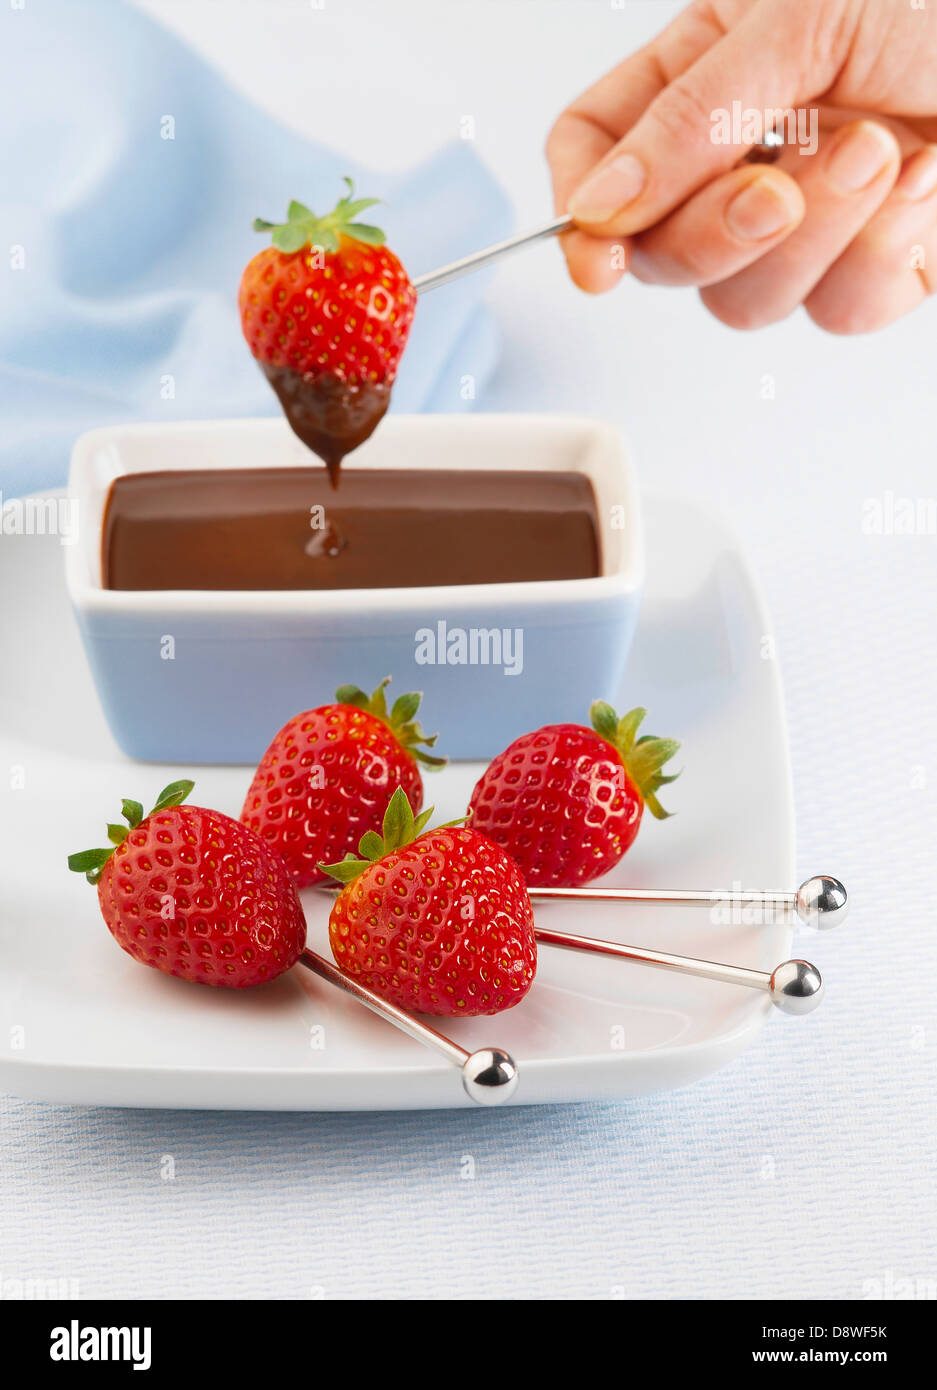 Dipping strawberries into melted chocolate Stock Photo